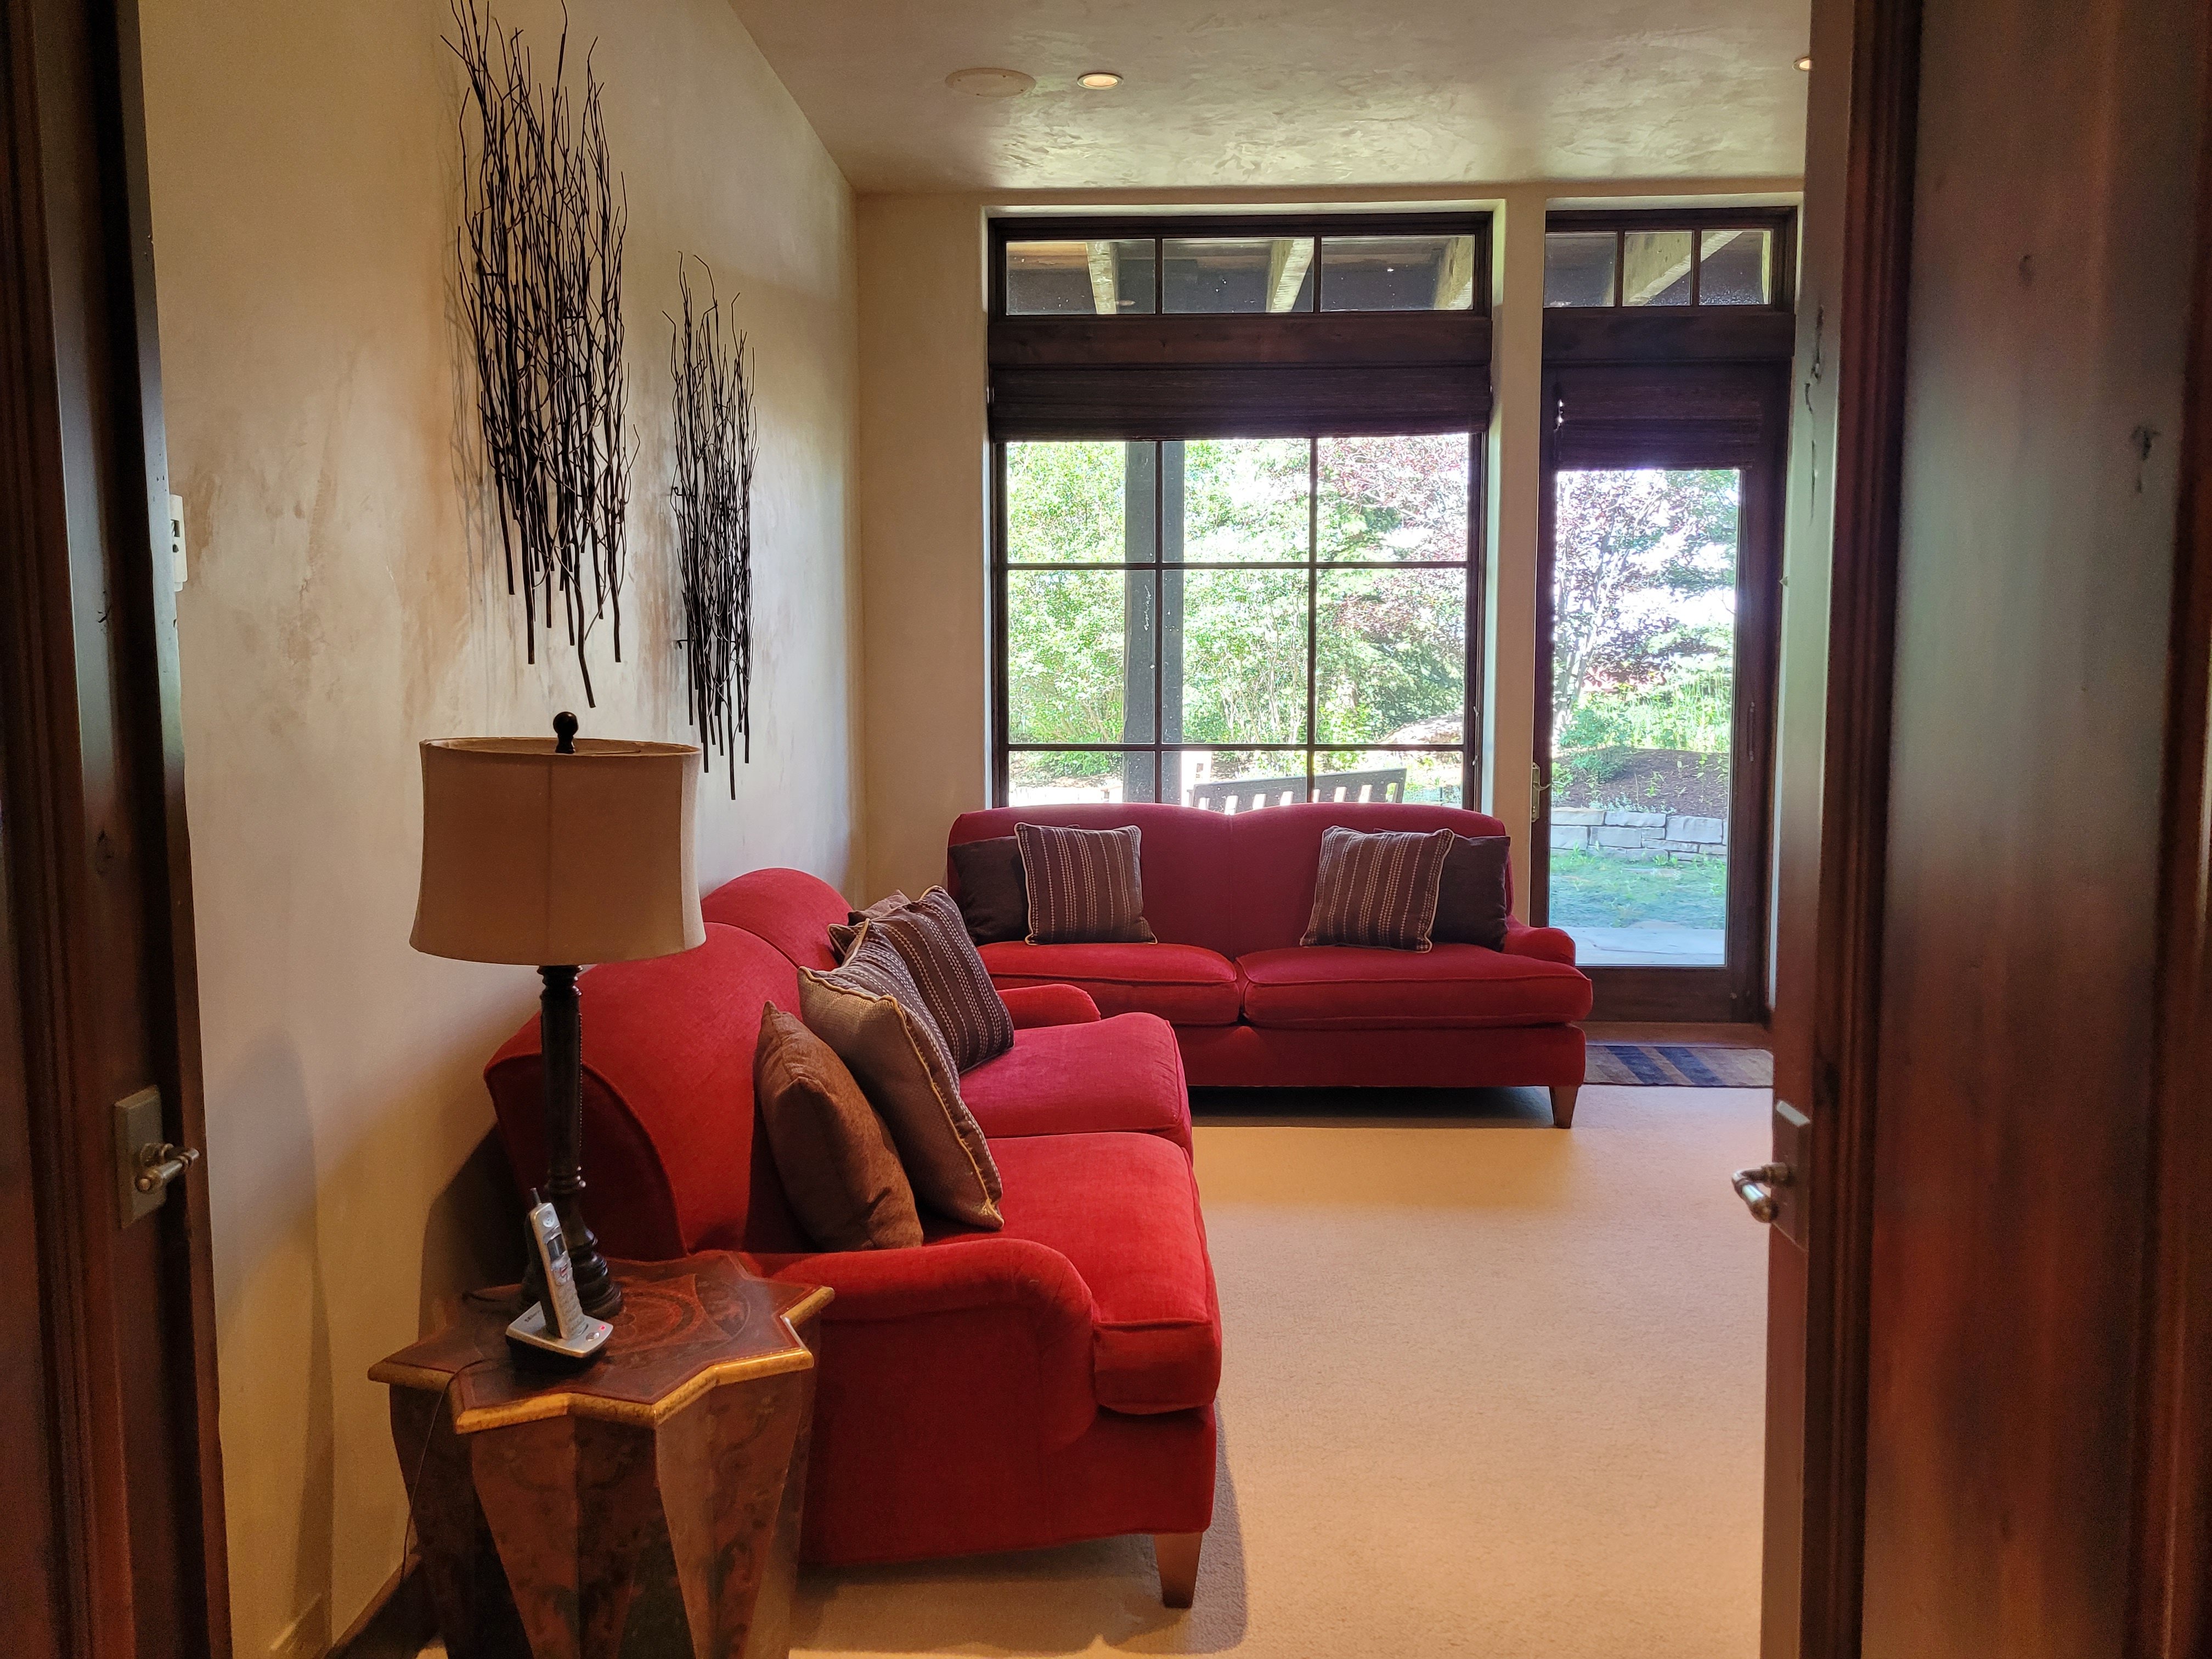 Living room with red couches and large window